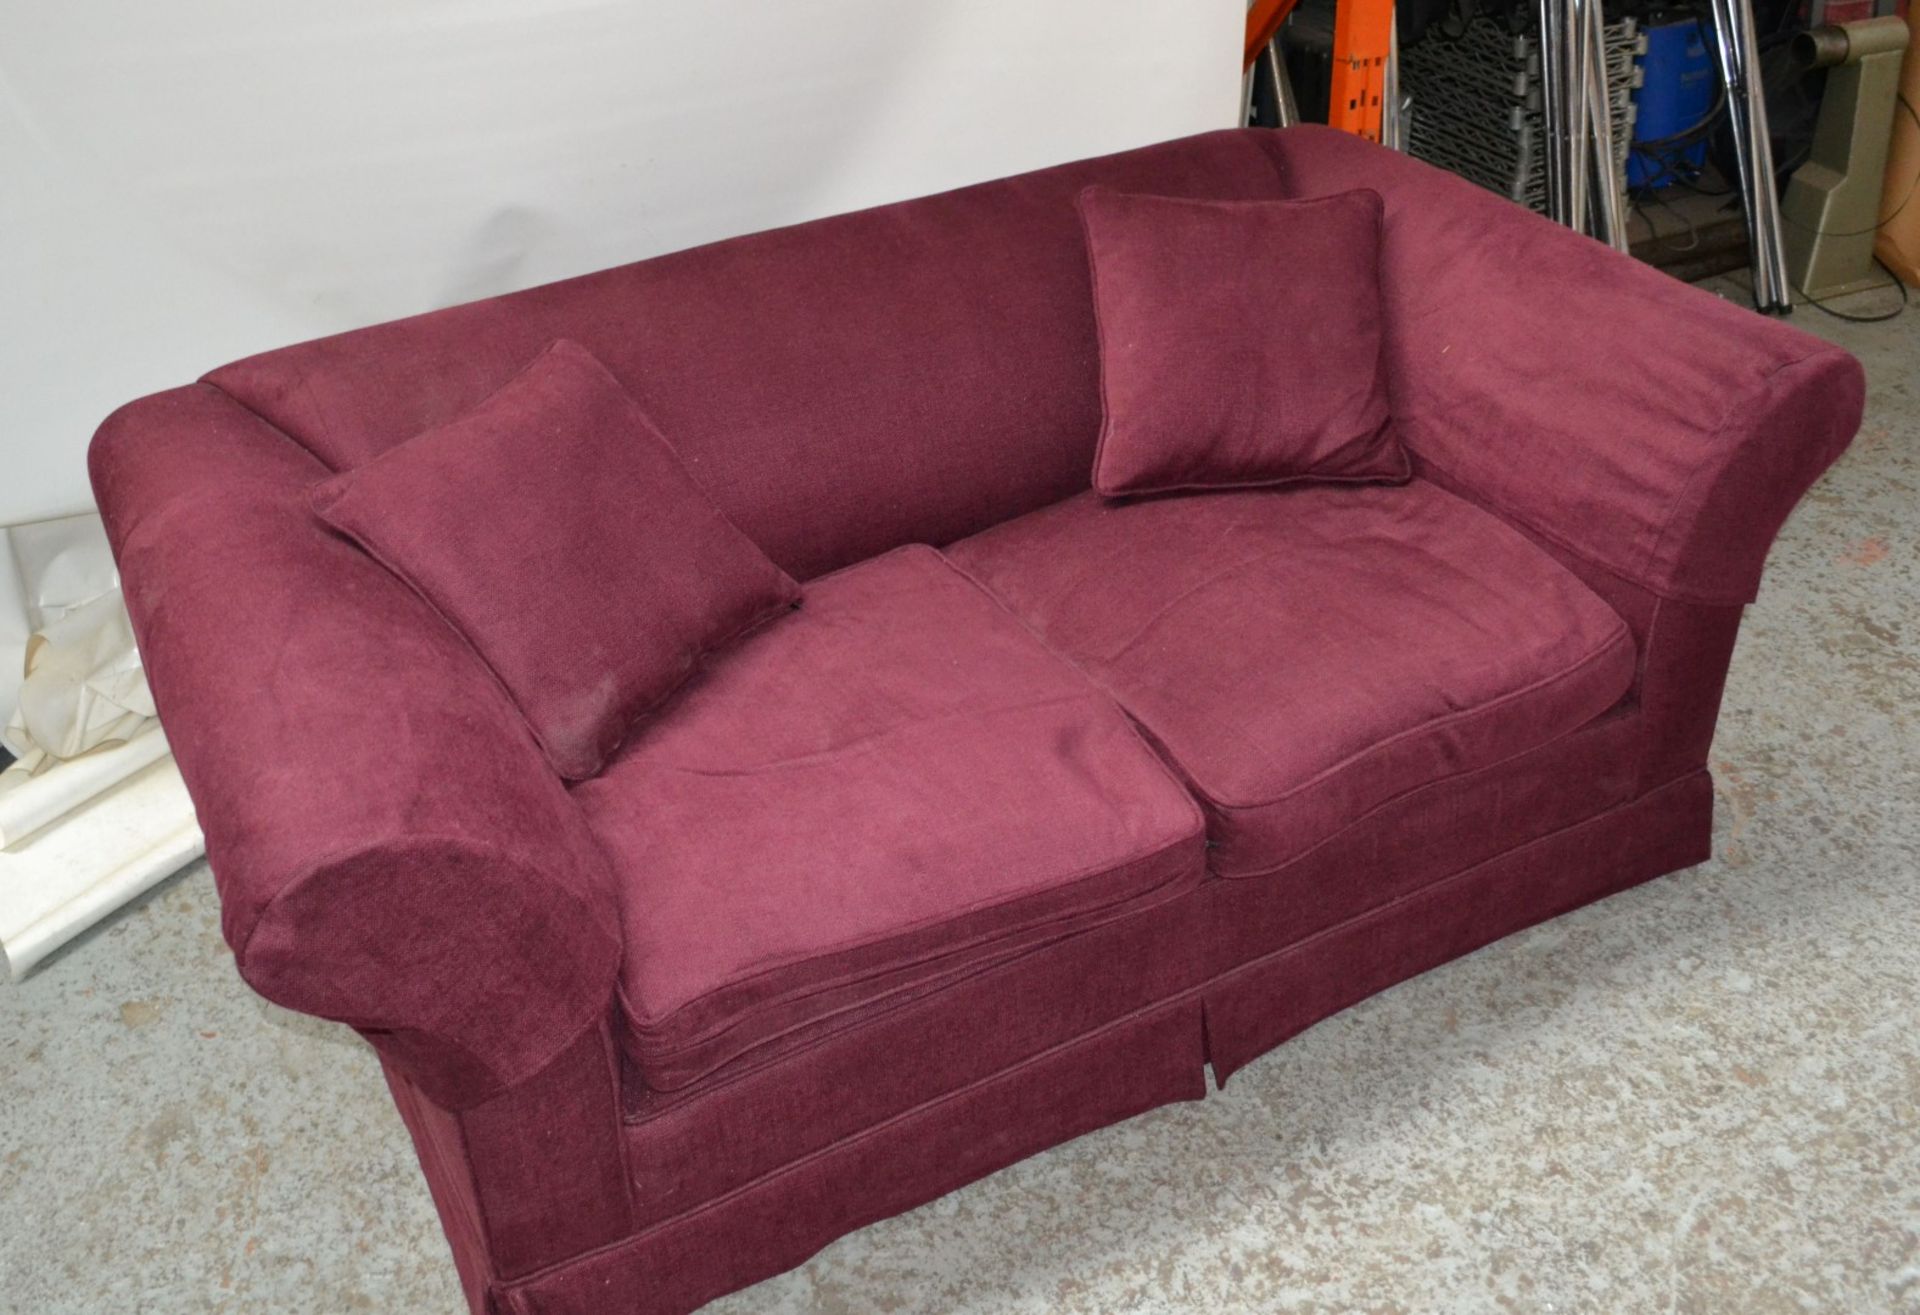 1 x Large Purple Sofa With Arm Covers - CL314 - Location: Altrincham WA14 - *NO VAT On Hammer*<B - Image 8 of 9